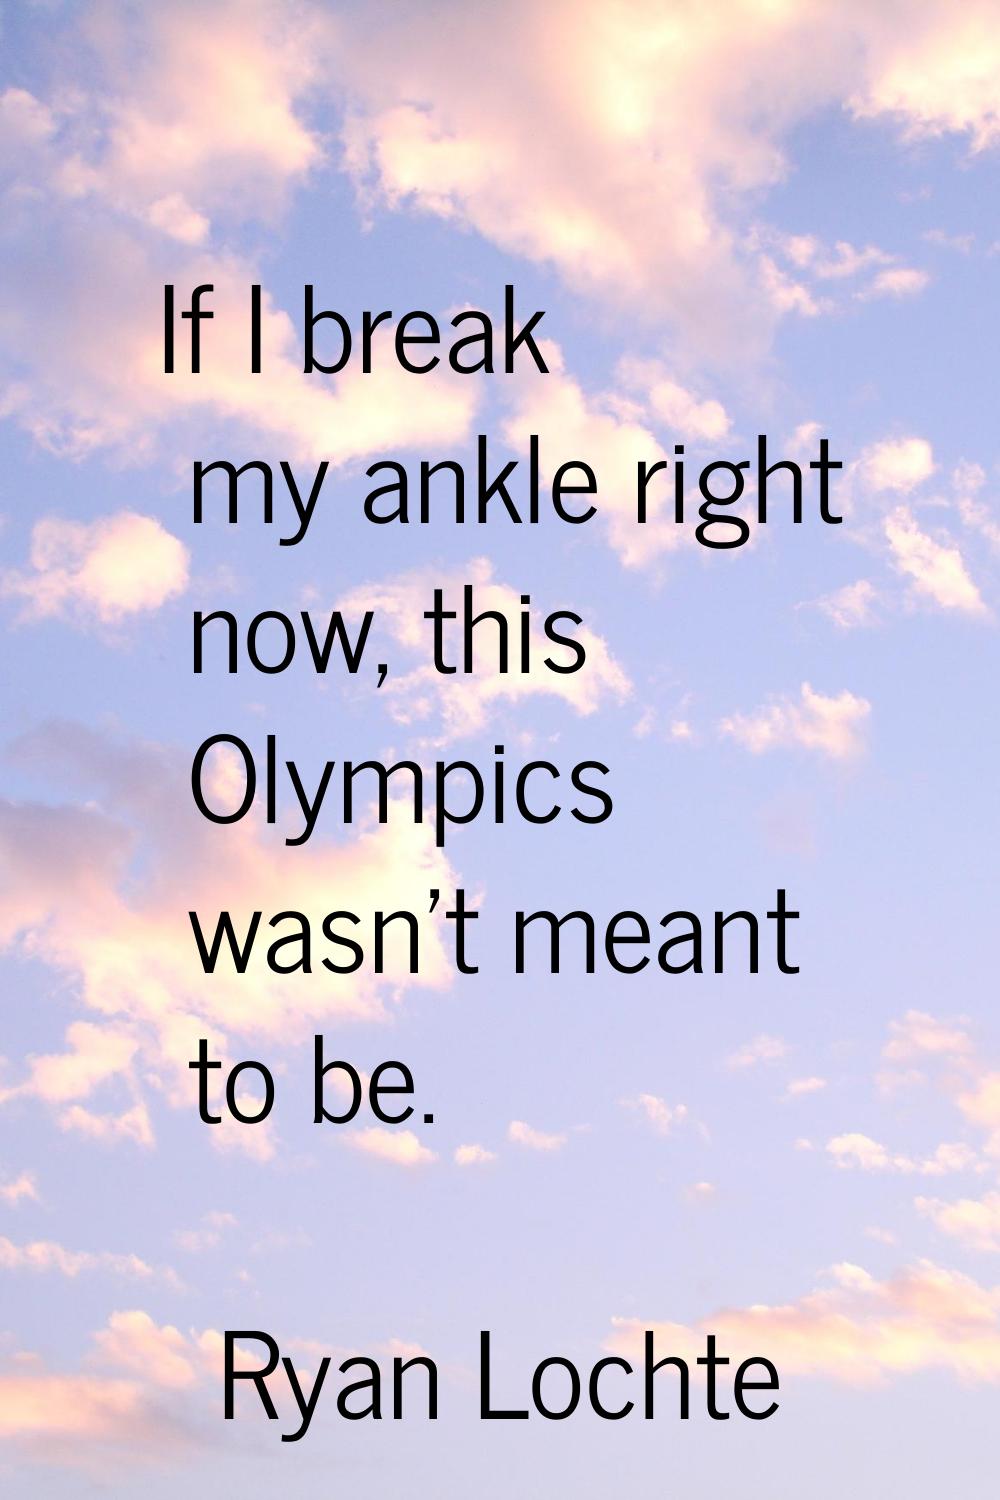 If I break my ankle right now, this Olympics wasn't meant to be.